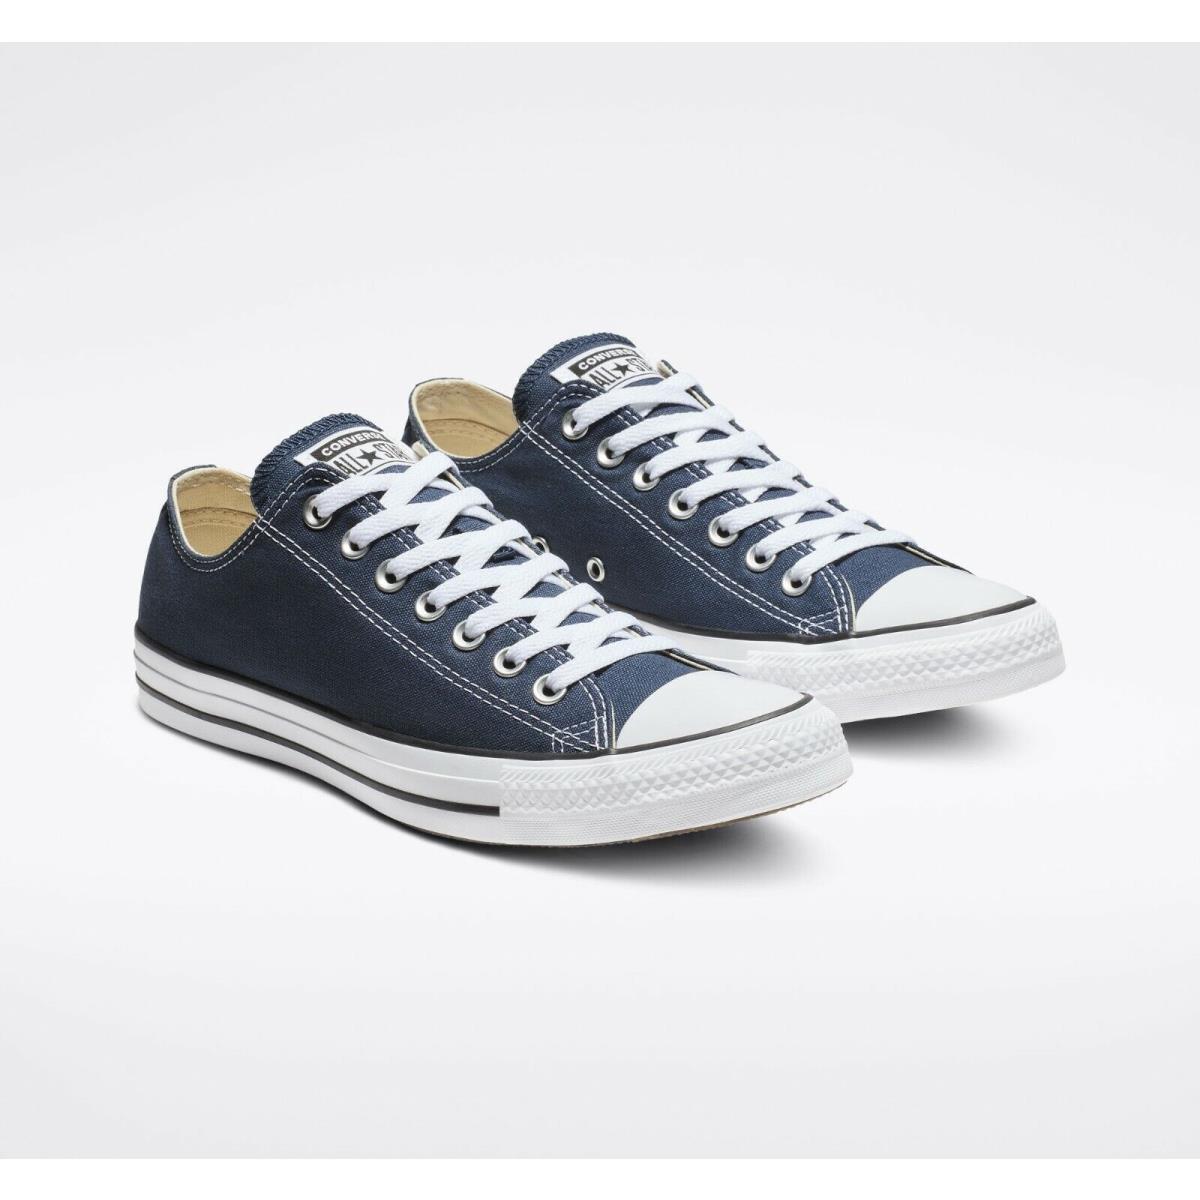 Classic Converse Unisex Chuck Taylor All Star Low Sneaker Canvas Upper Mens Size Navy